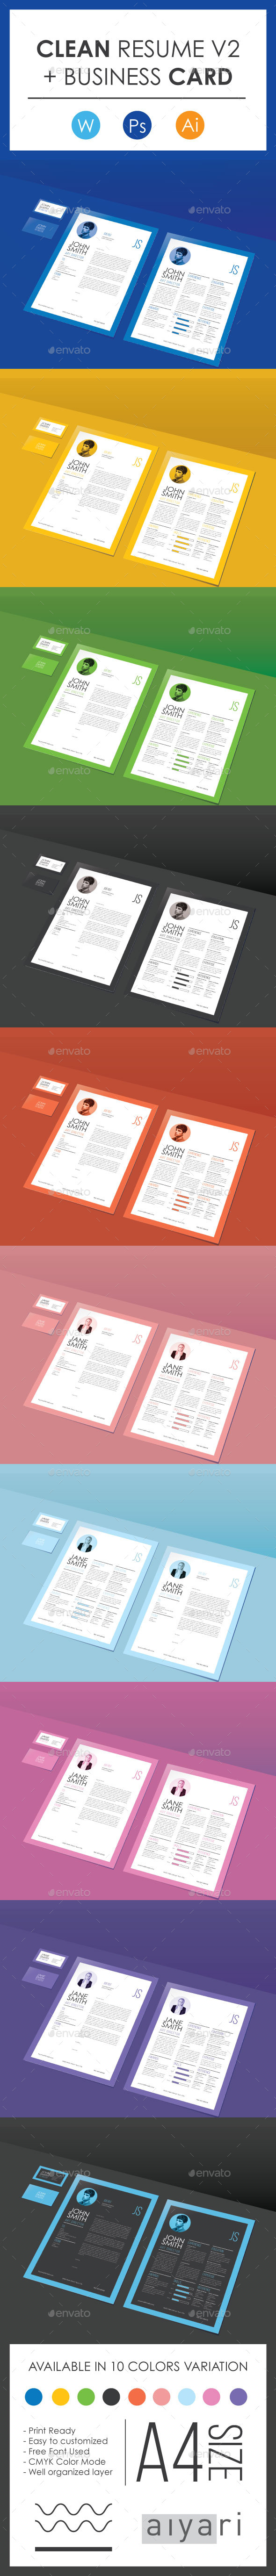 Clean CV & Resume V2 with Business Card